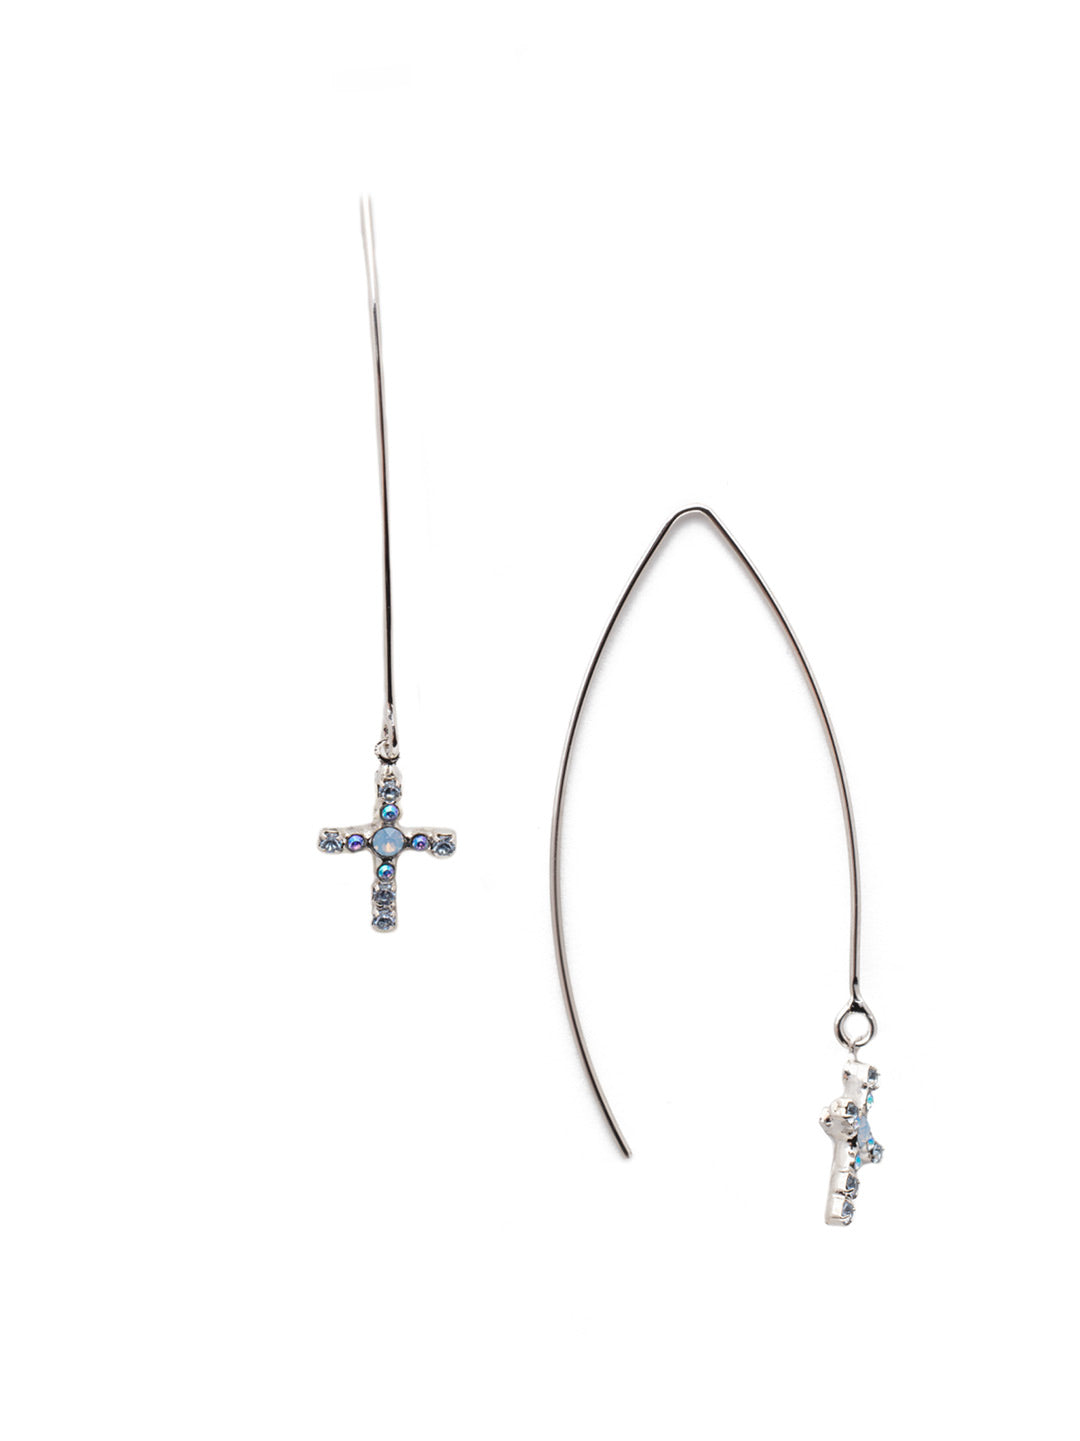 Jodie Cross Dangle Earring - EEX8PDWNB - The Jodie Cross Dangle Earrings feature an elongated open hoop with a crystal studded cross dangling at each base From Sorrelli's Windsor Blue collection in our Palladium finish.